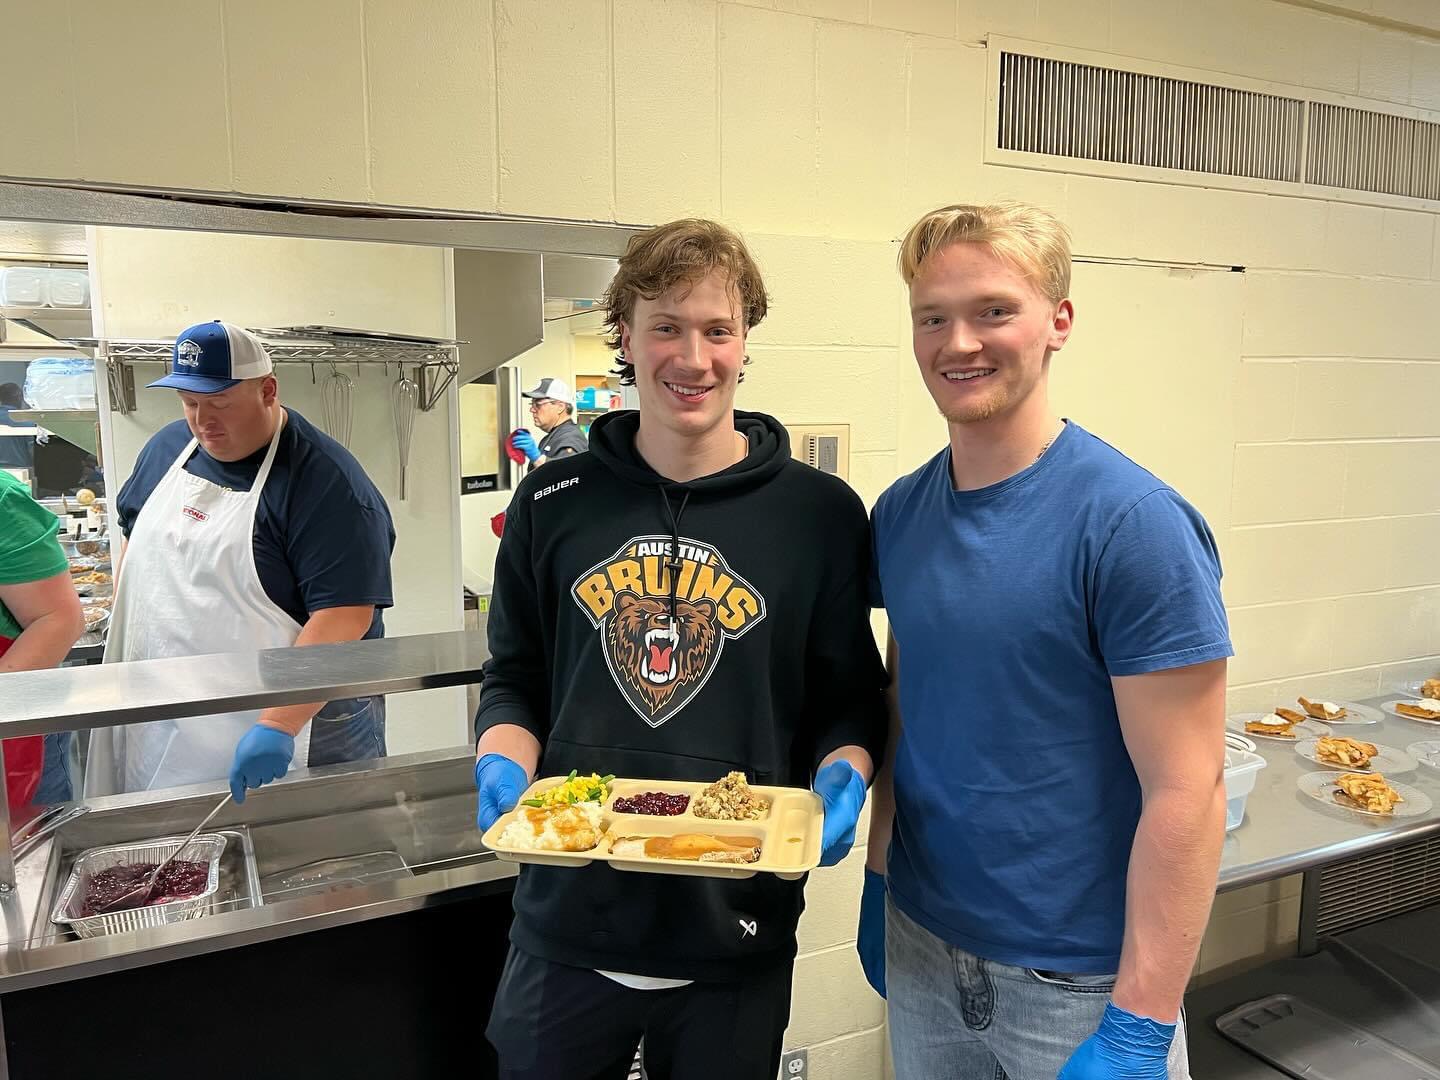 Austin Bruins players serving food at Salvation Army